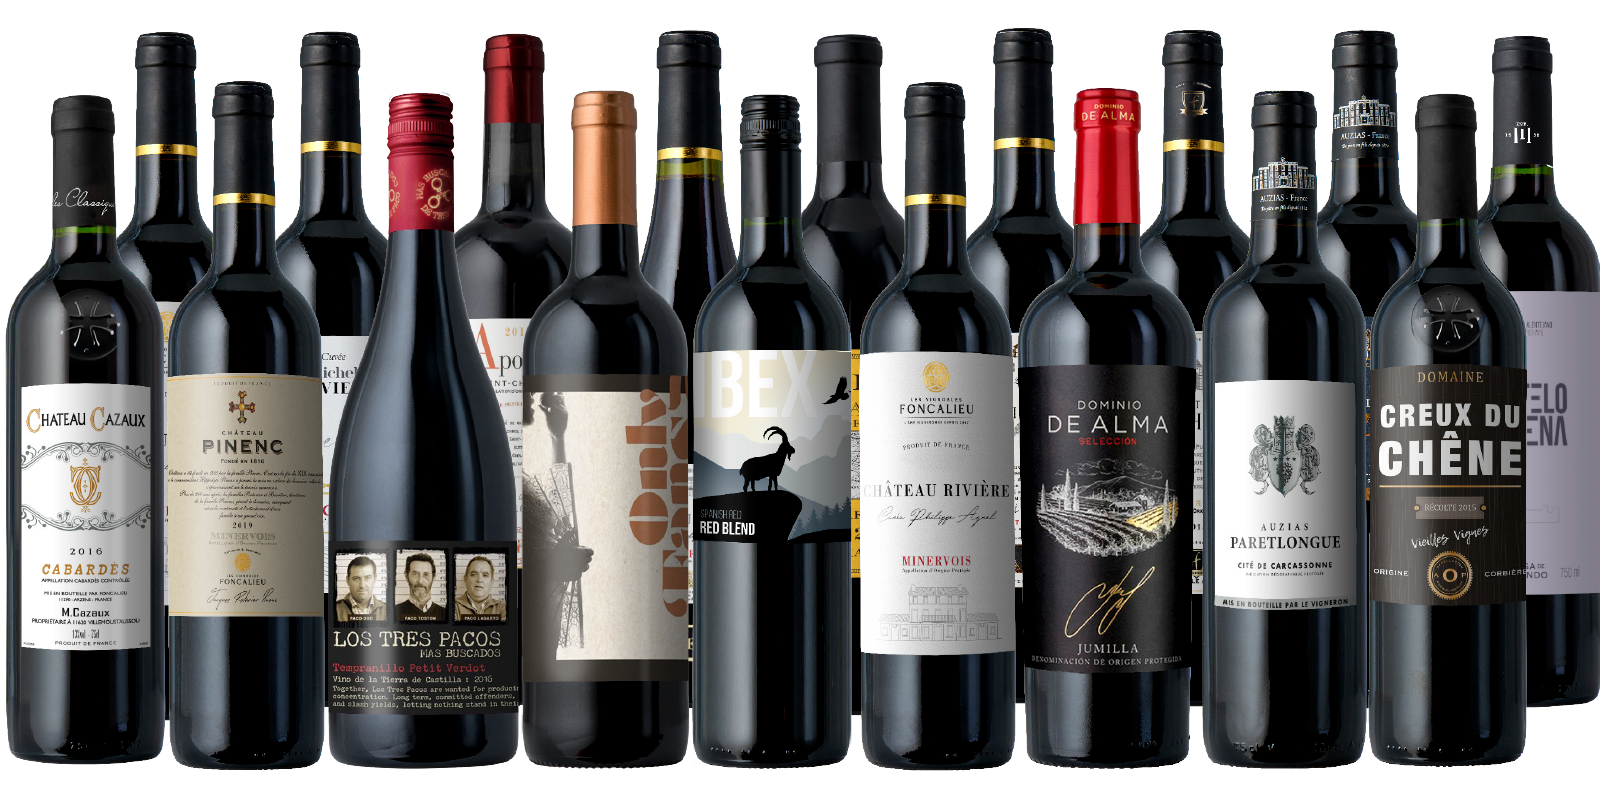 UPGRADE: Our Most Premium Red Blends EVER 18-Pack!*